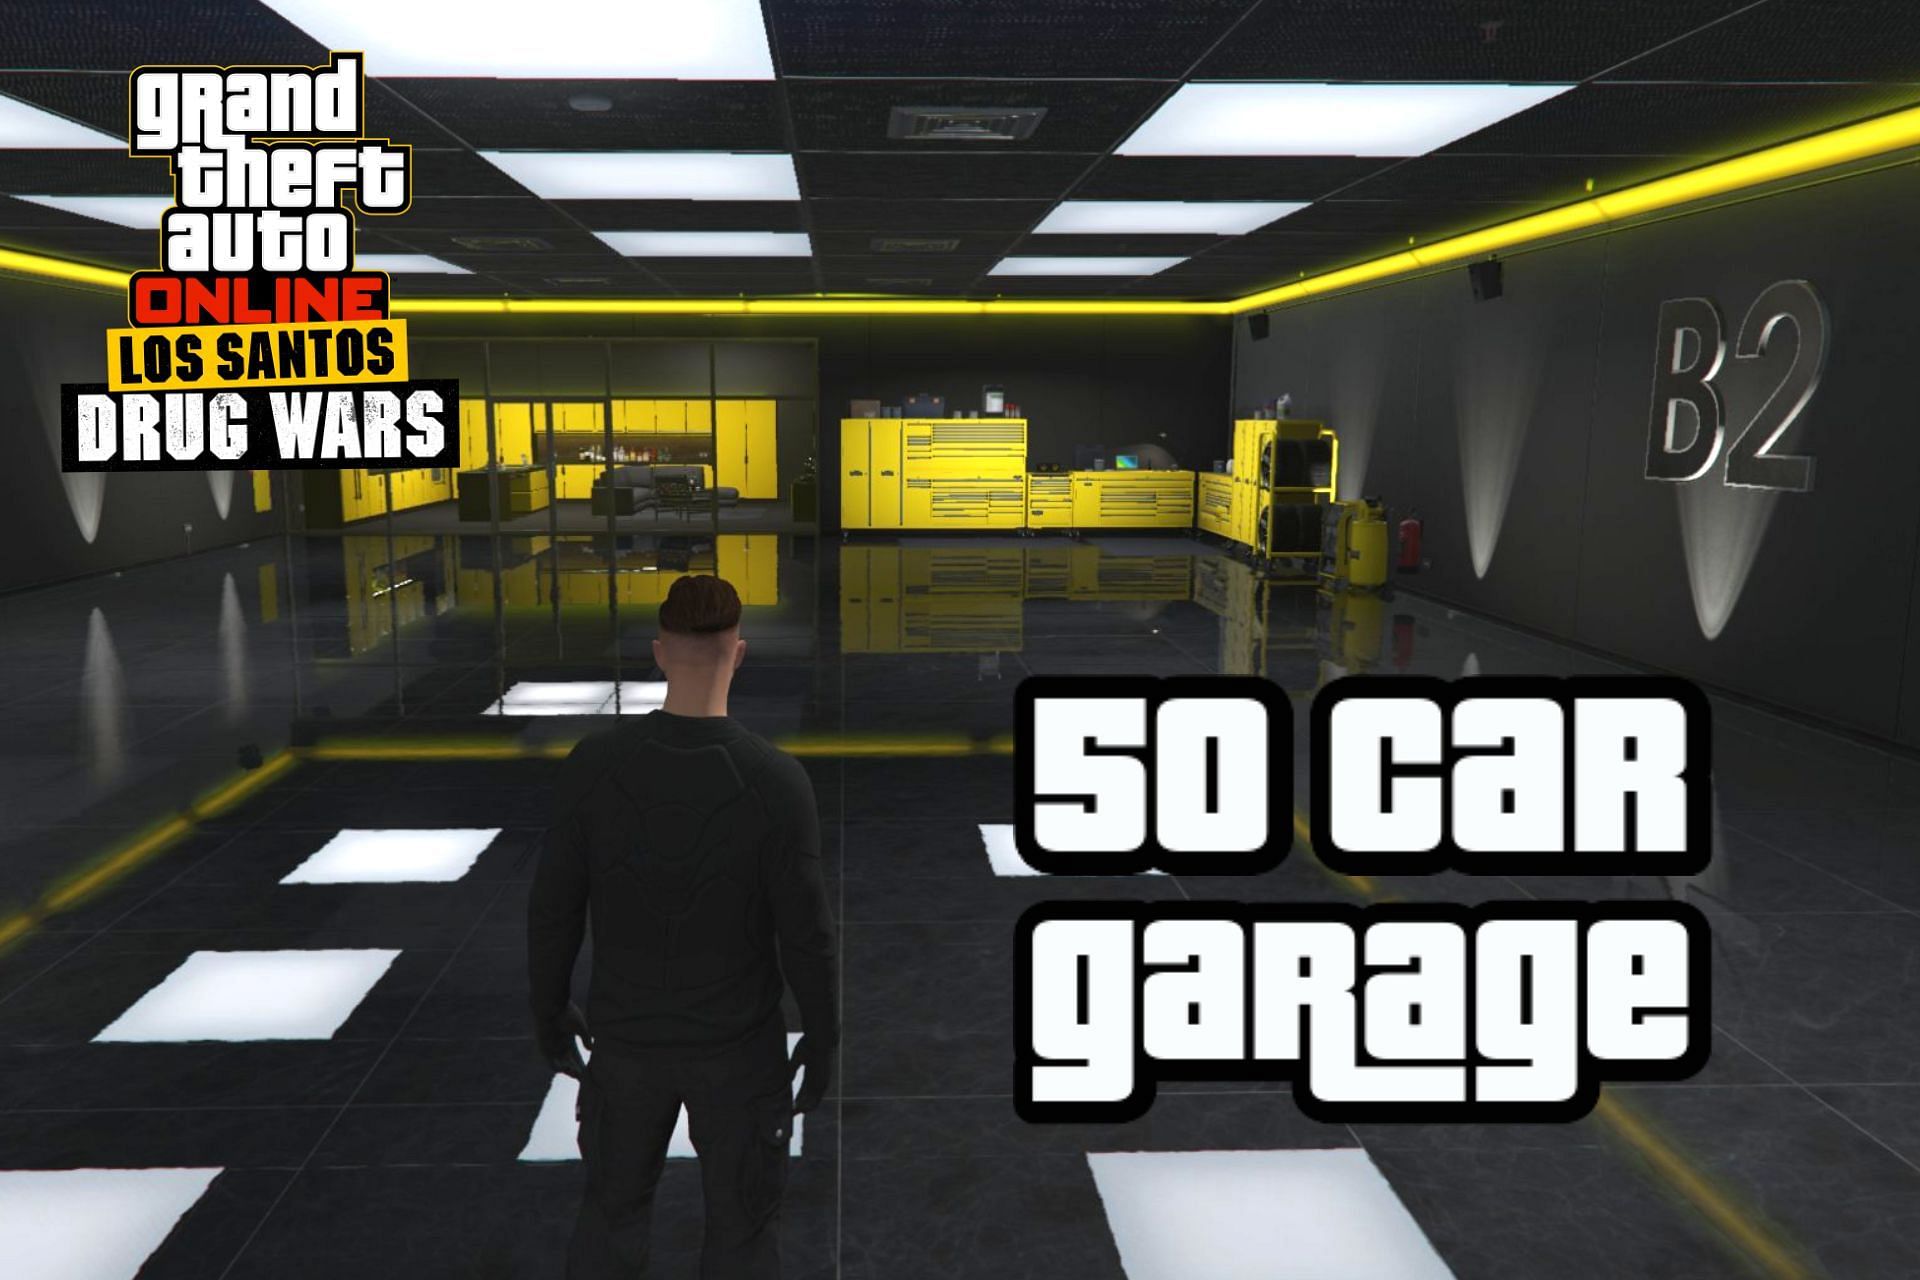 The 50-car garage is currently one of the most anticipated drip-feed content in GTA Online (Image via TW/Tez2)